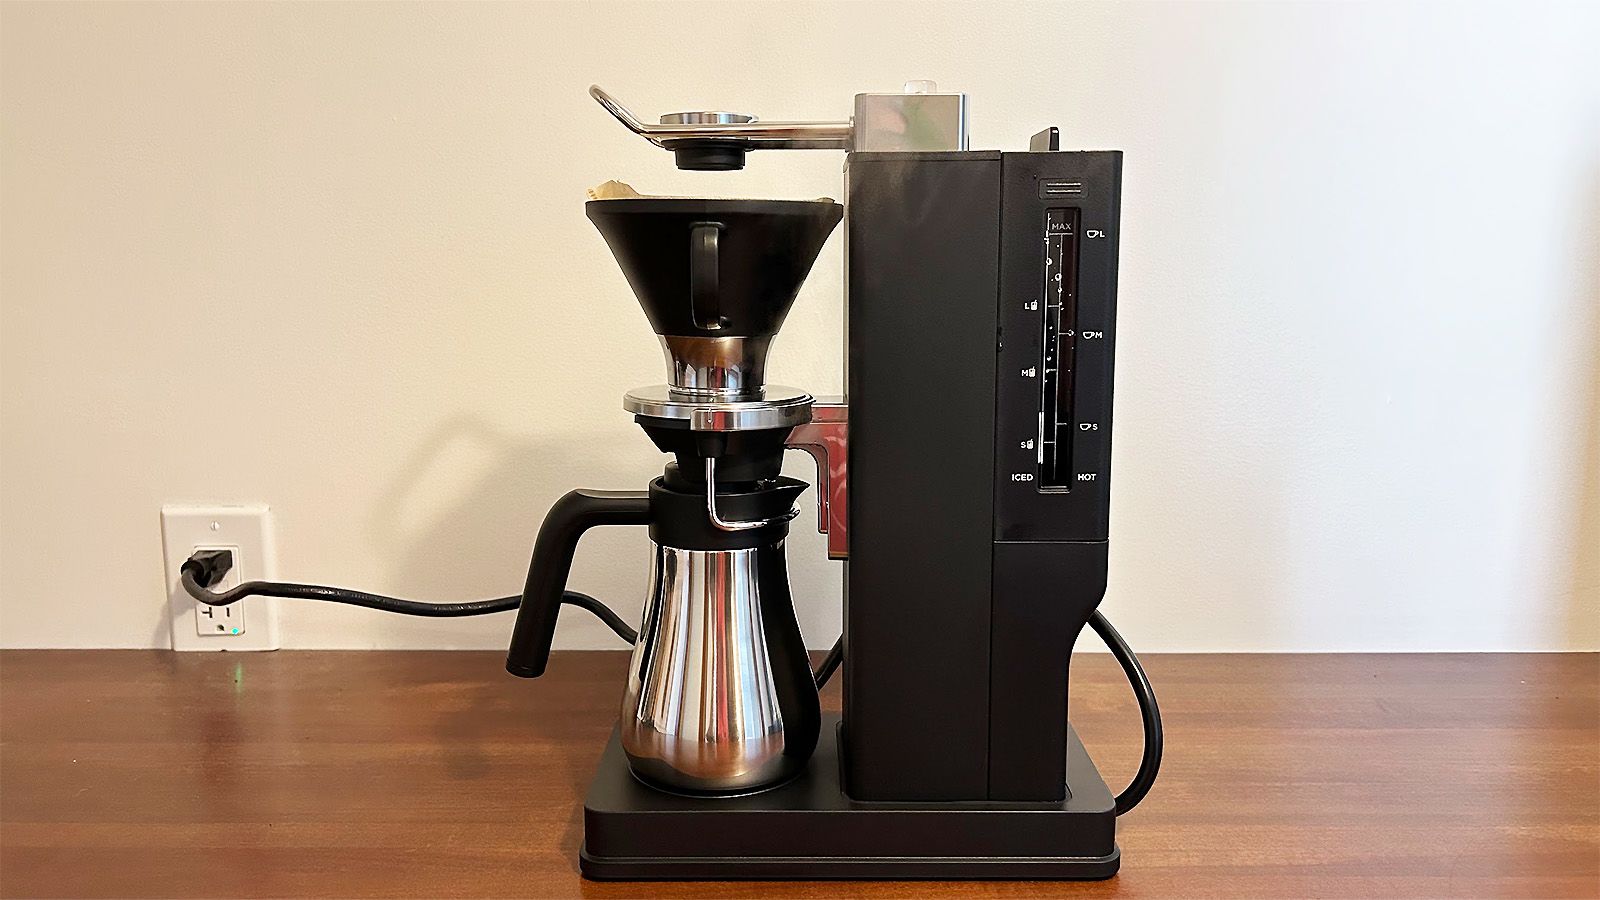 How to Make Coffee in a Coffee Urn - Professional Series